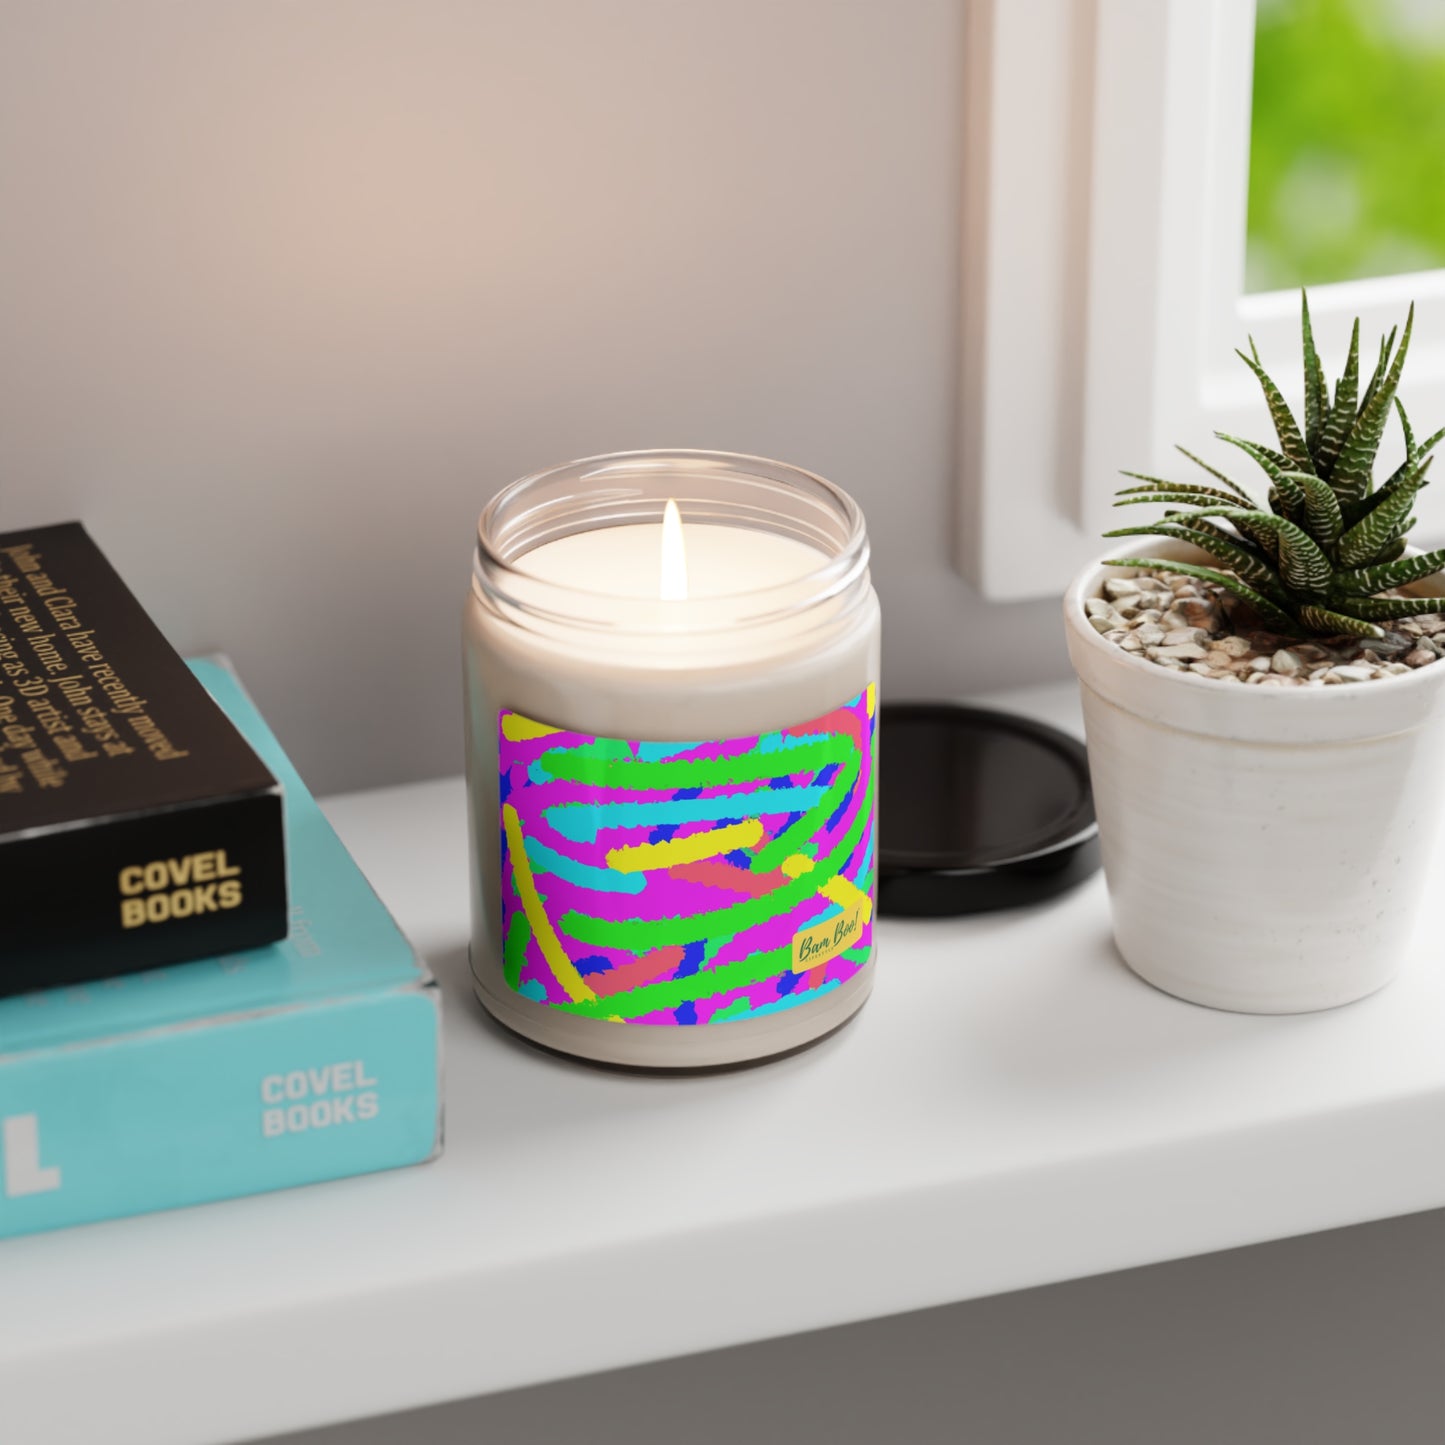 "Radiant Resonance: Exploring Color Through Emotion" - Bam Boo! Lifestyle Eco-friendly Soy Candle